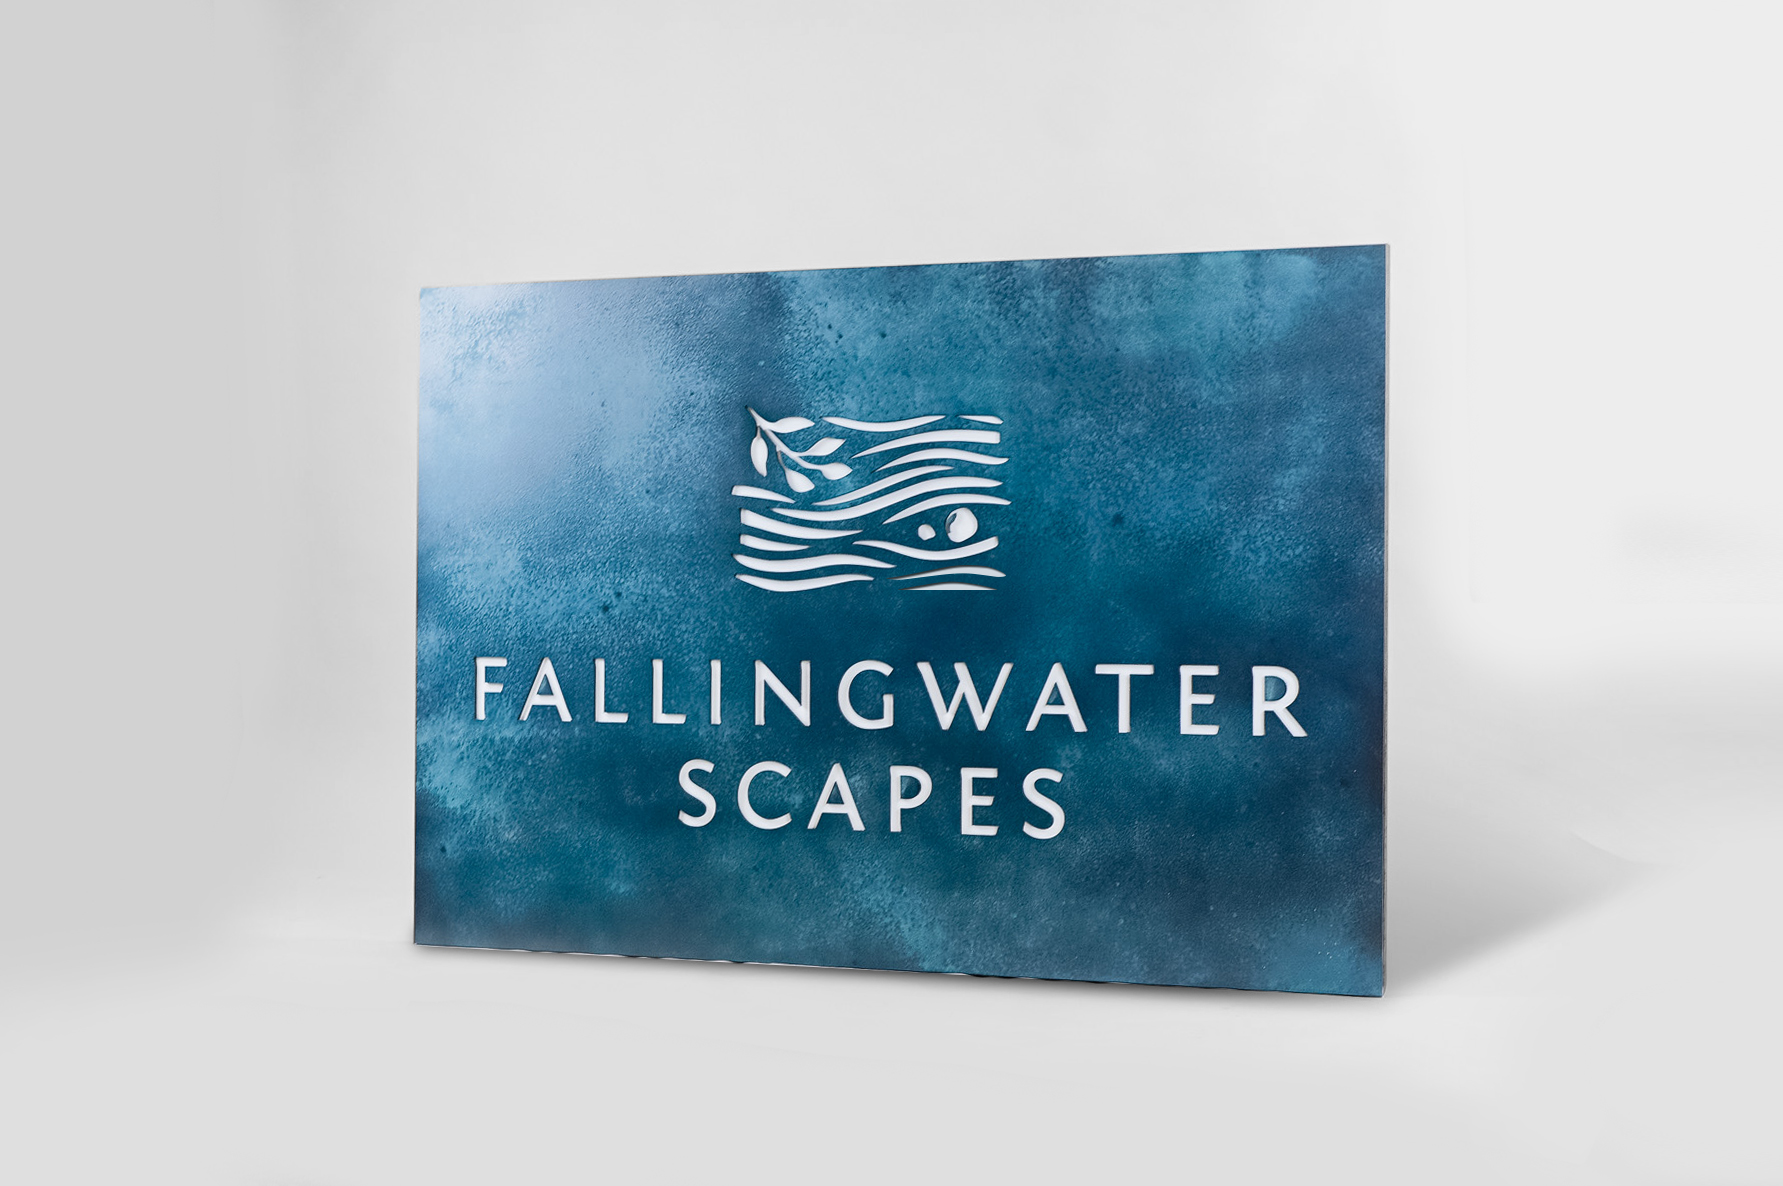 Blue-hued, rusted bronze/brass/copper patina style sign for FallingWater Scapes, a water feature design, construction and maintenance company in Dover, MA.